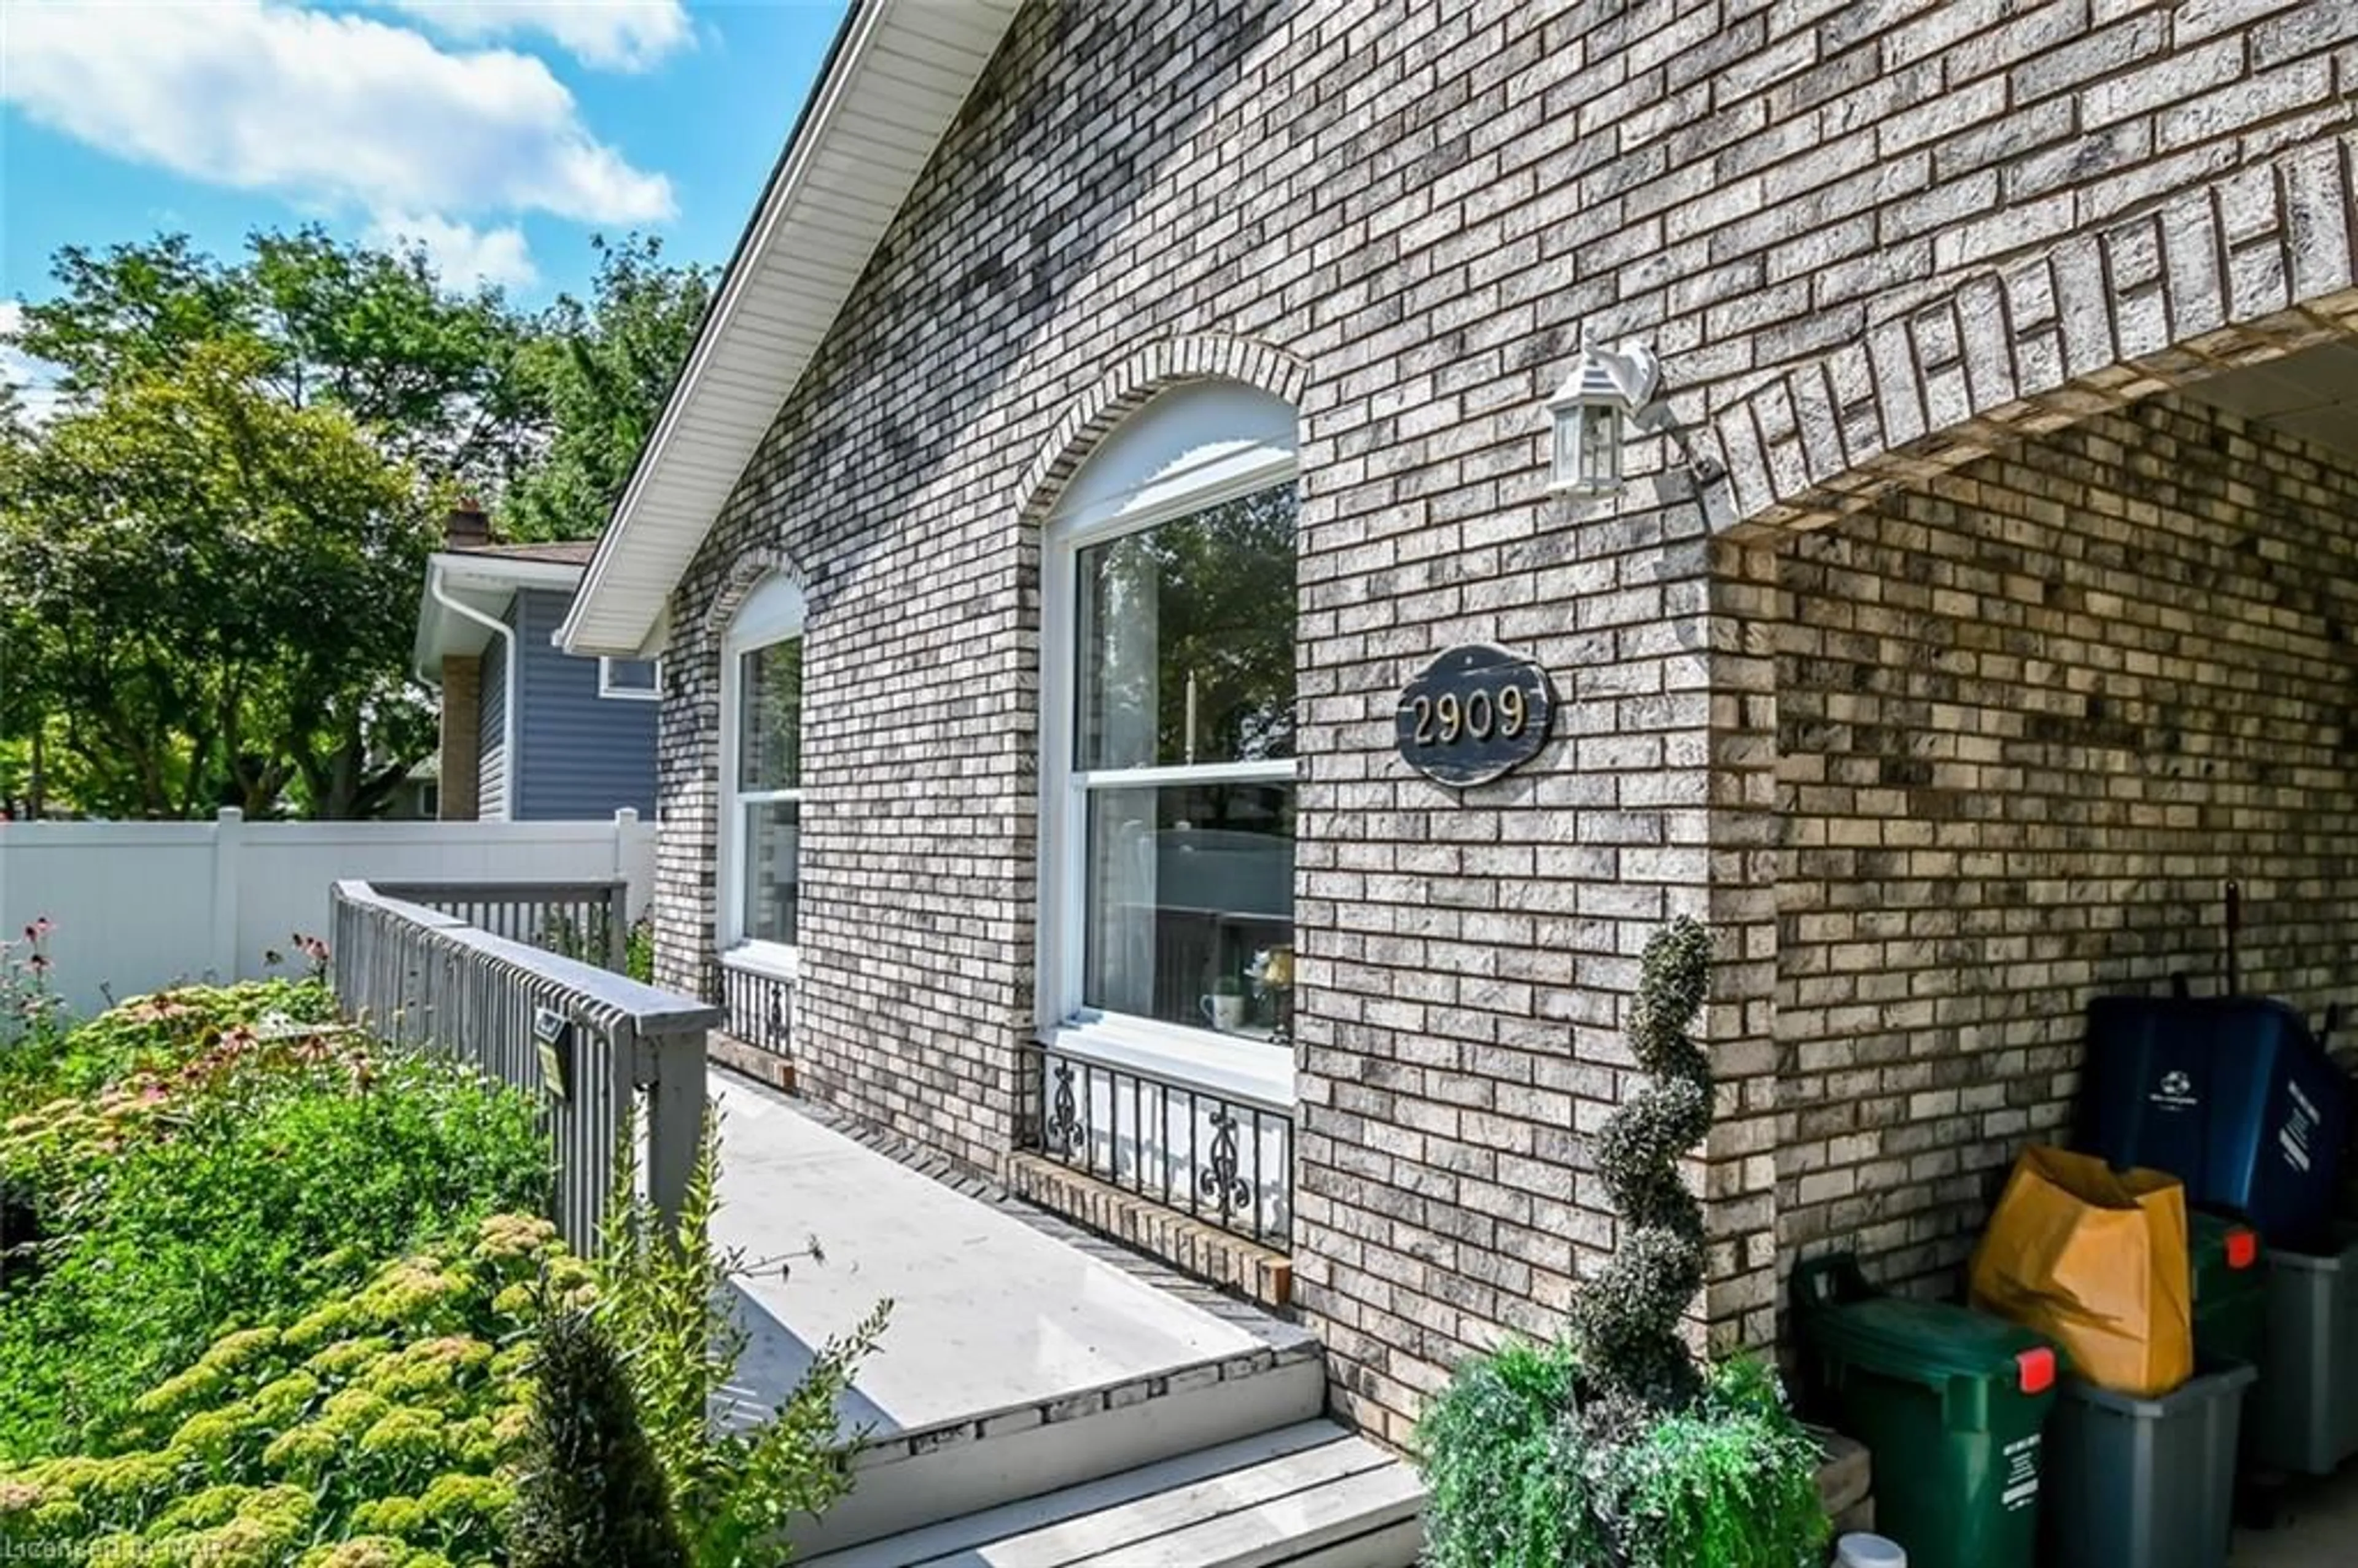 Home with brick exterior material for 2909 Henley Ave, Niagara Falls Ontario L2J 3M3